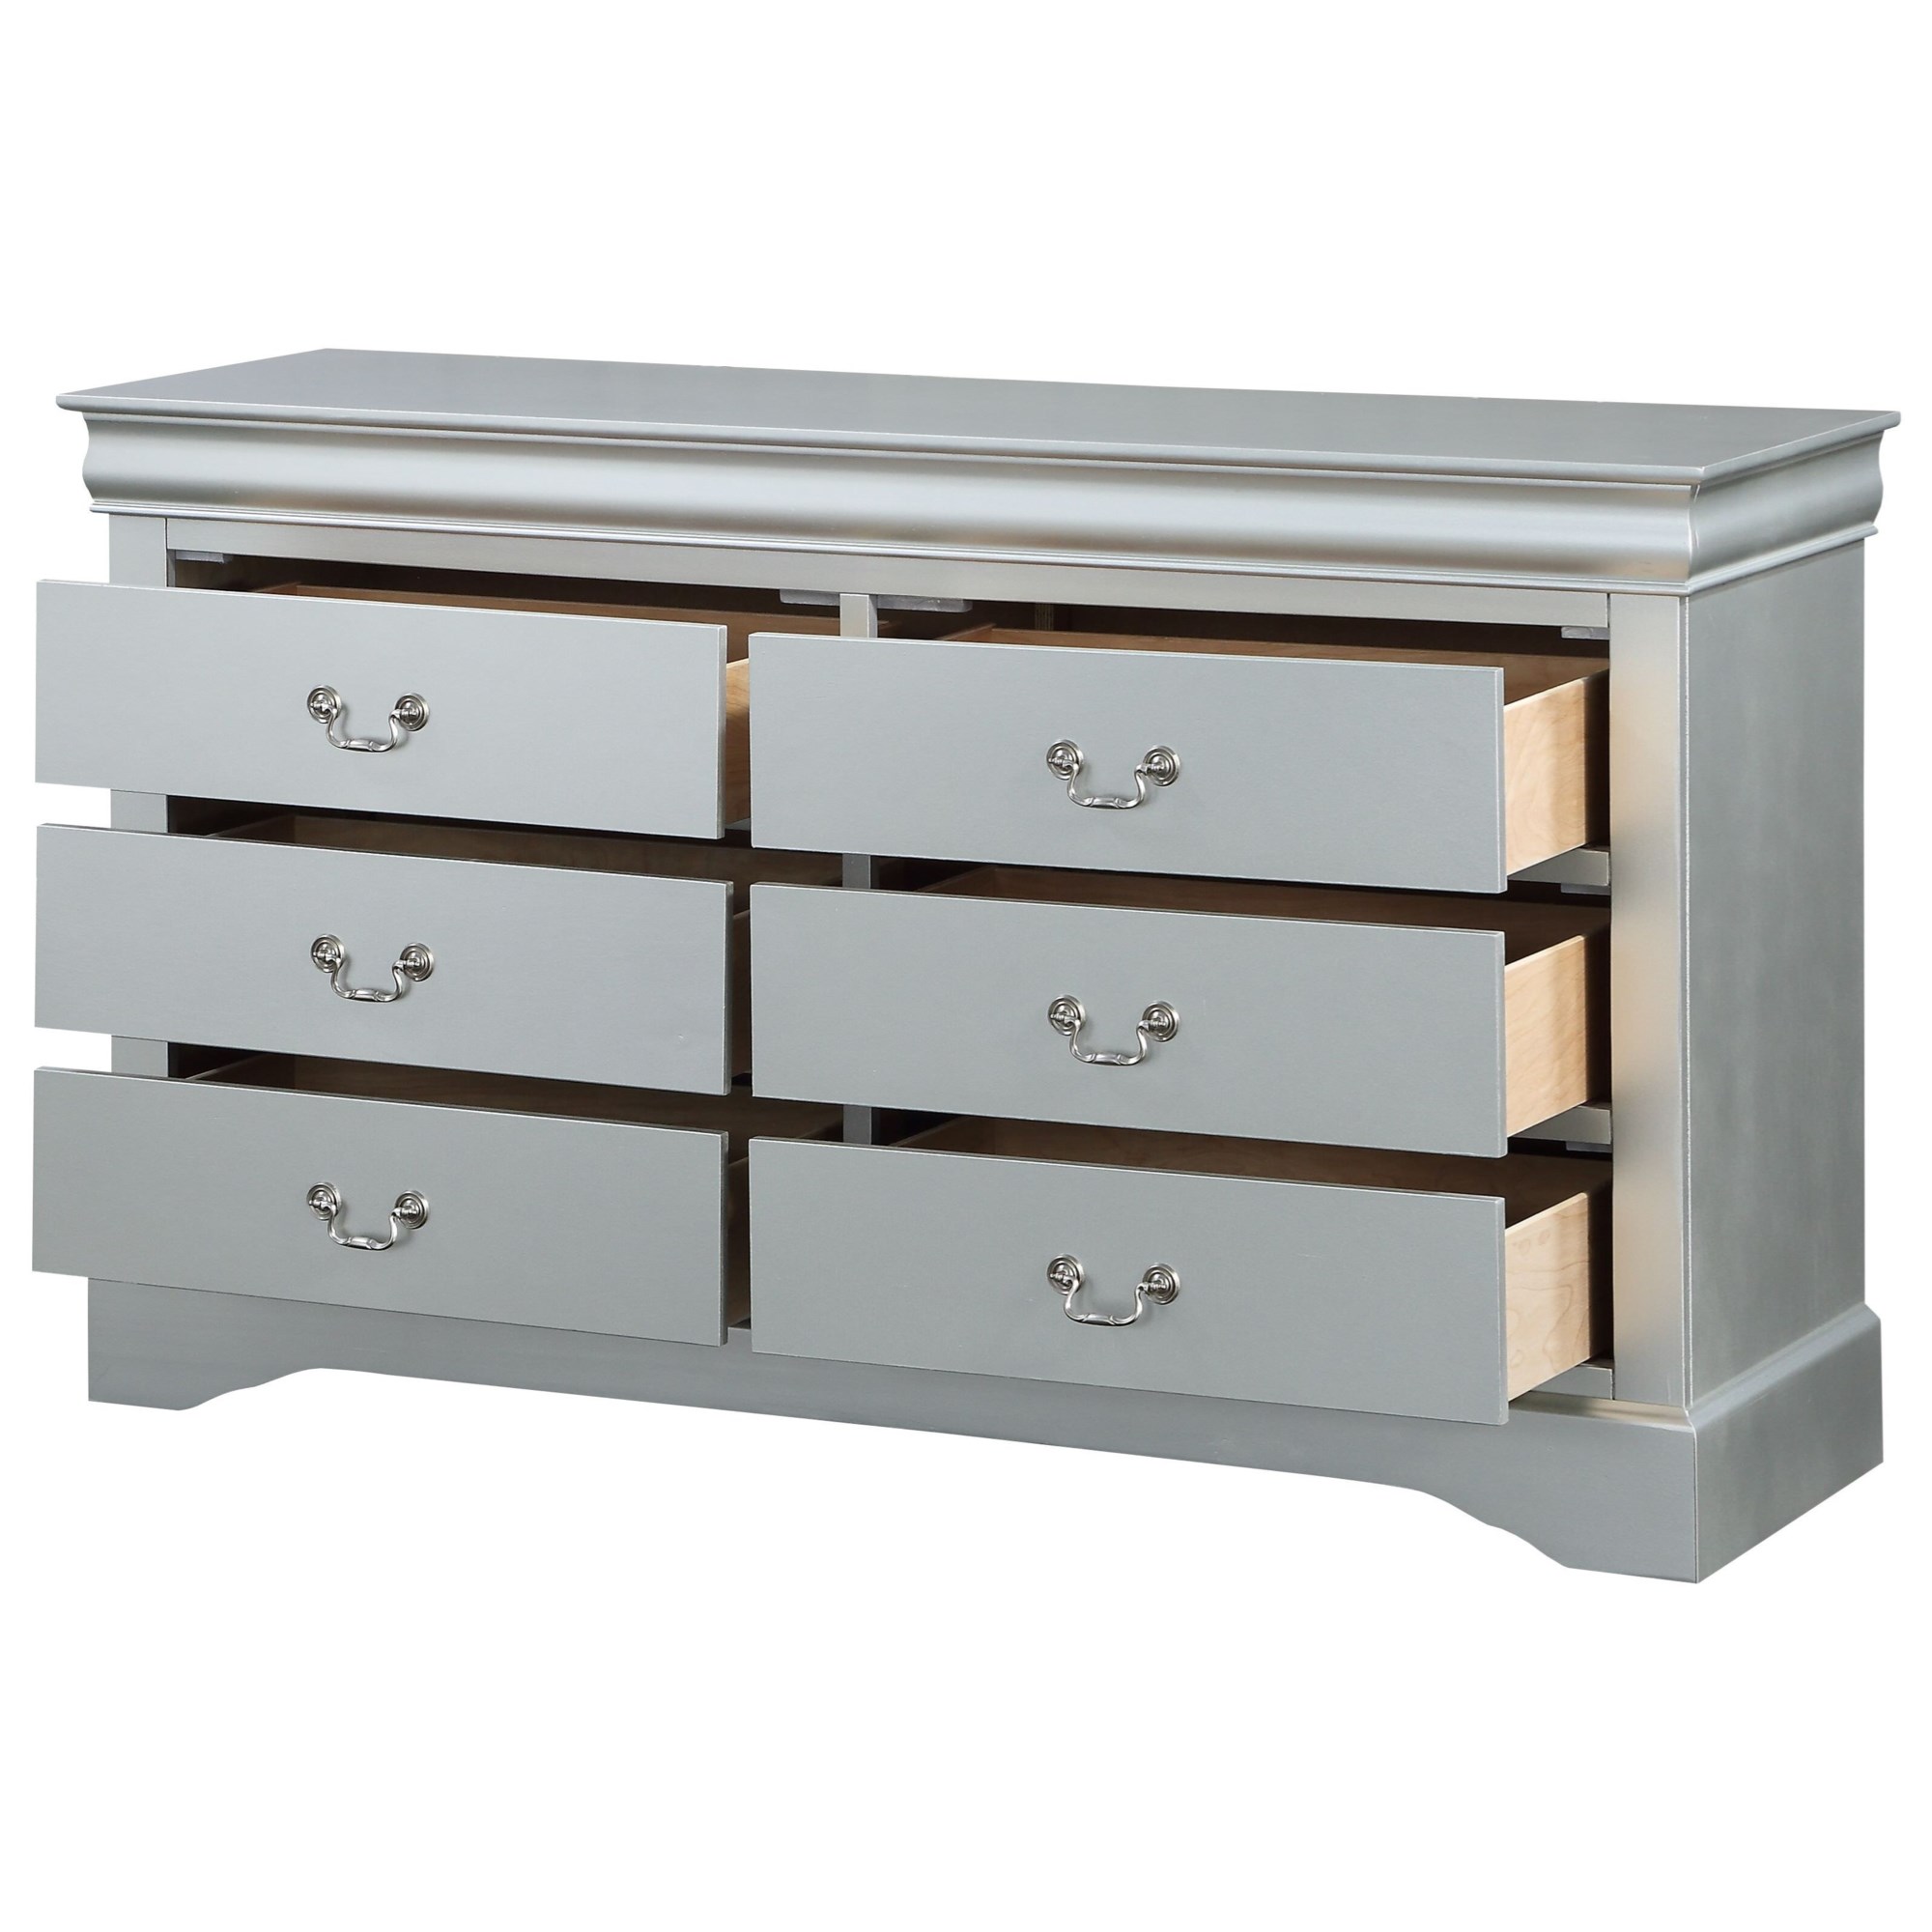 Acme Louis Philippe 6-Drawer Dresser in White 23835